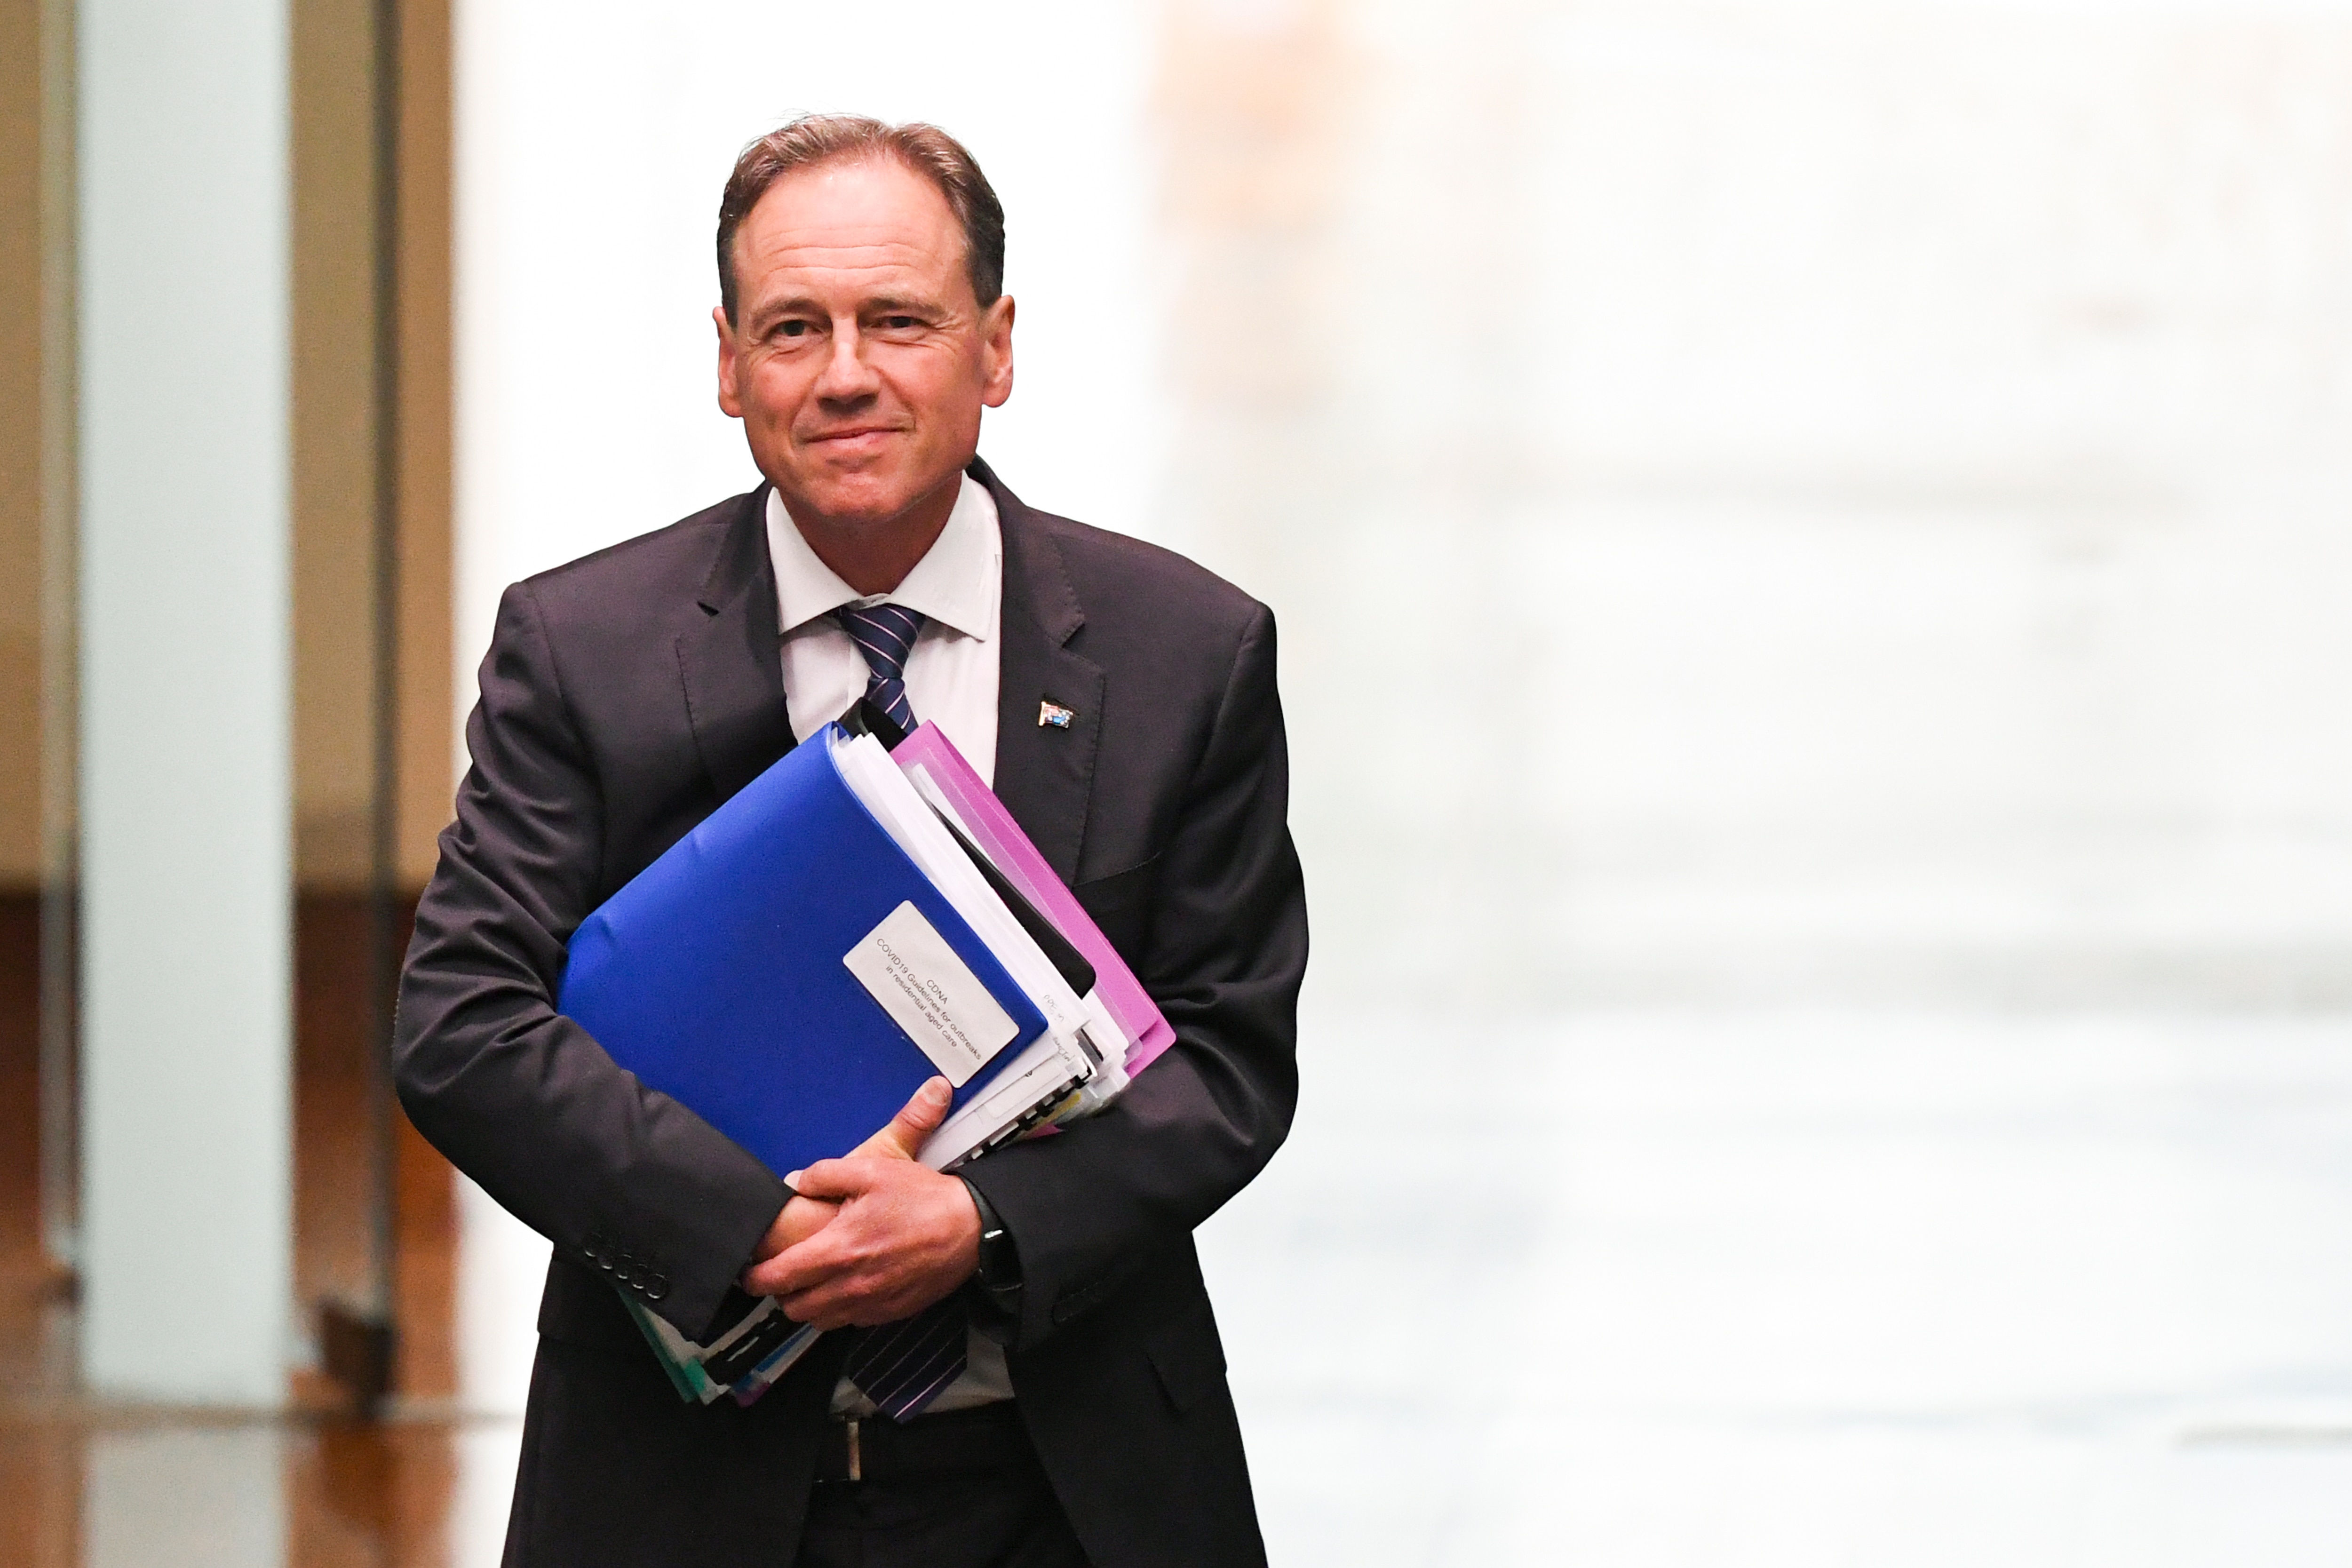 Australian Health Minister Greg Hunt arrives during House of Representatives Question Time at Parliament House in Canberra, Wednesday, February 3, 2021. (AAP Image/Lukas Coch) NO ARCHIVING